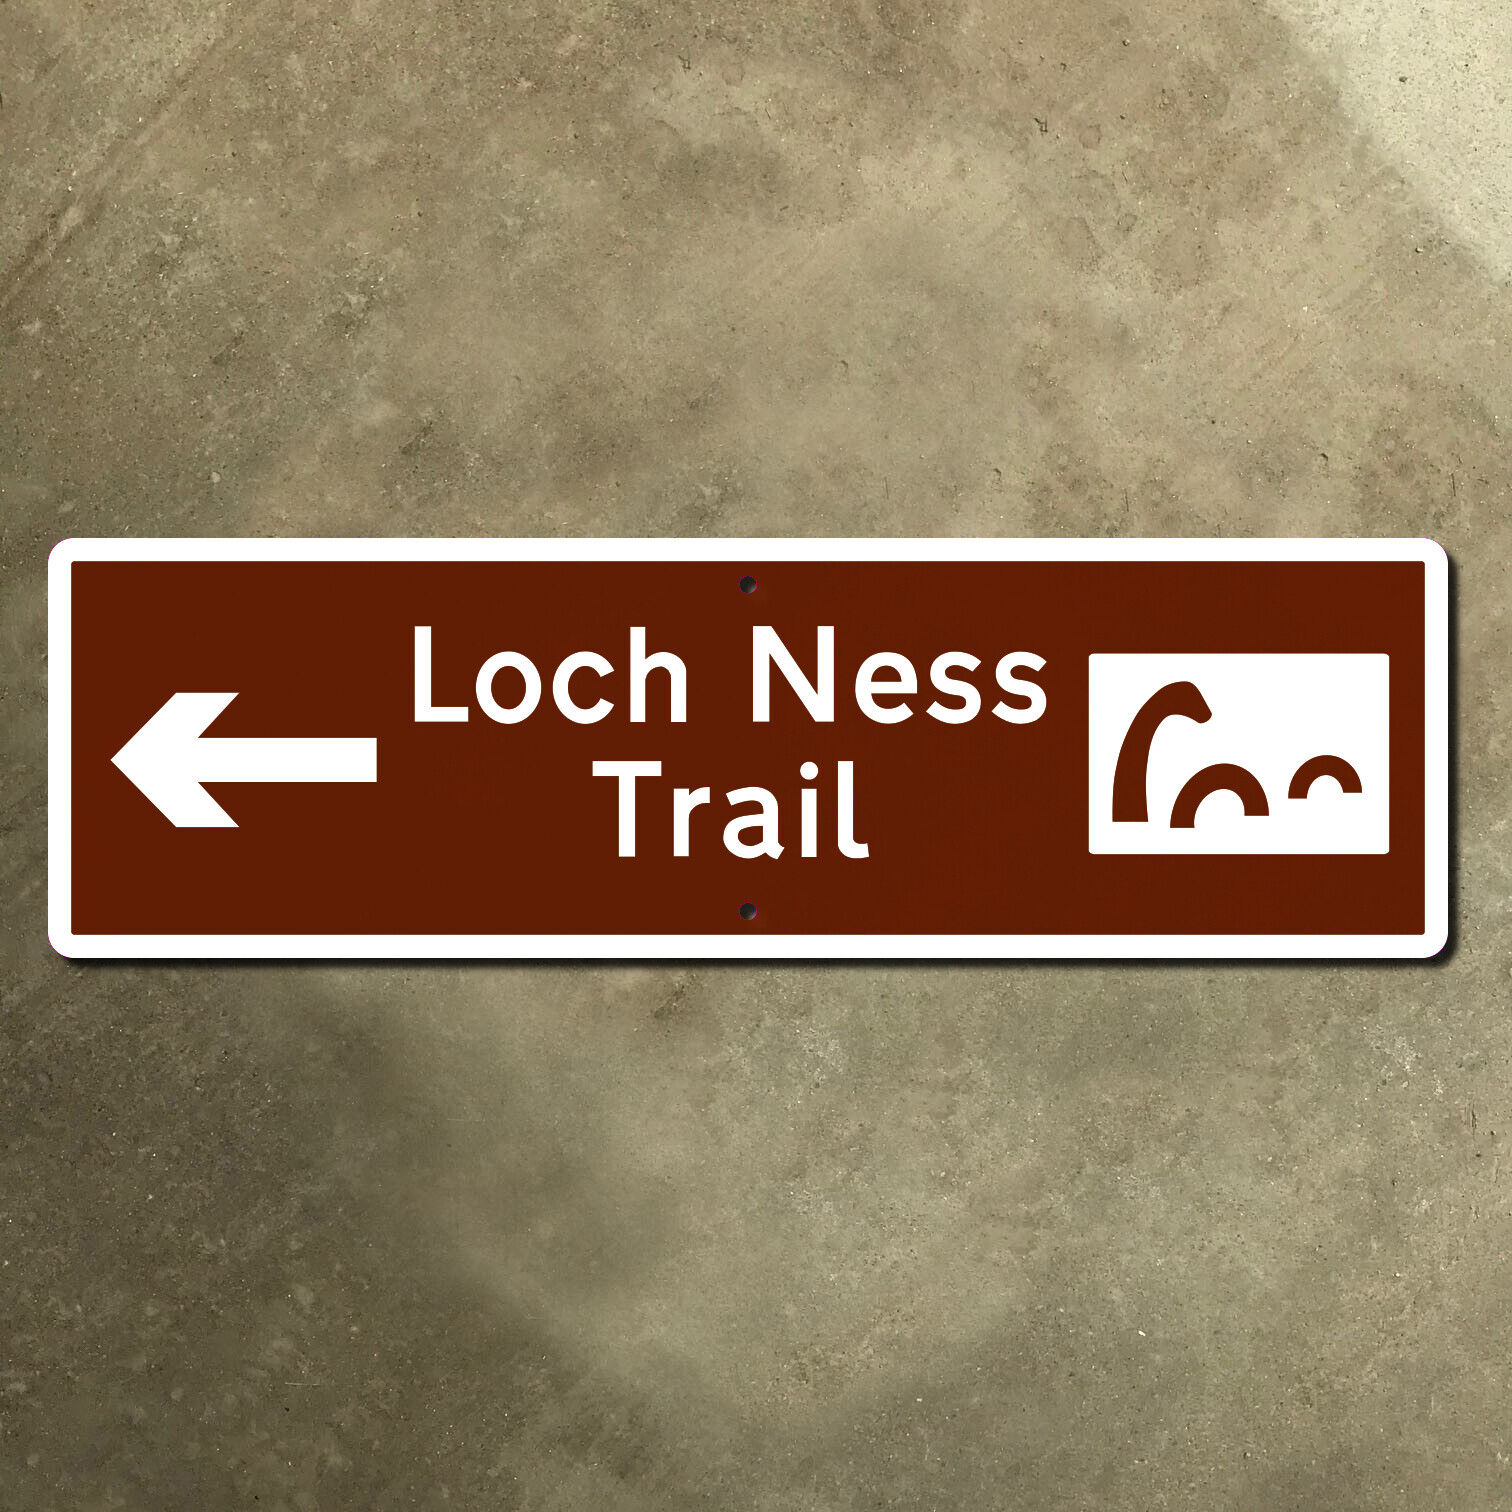 Scotland Loch Ness Trail Monster Nessie cryptid highway road guide sign 20x6